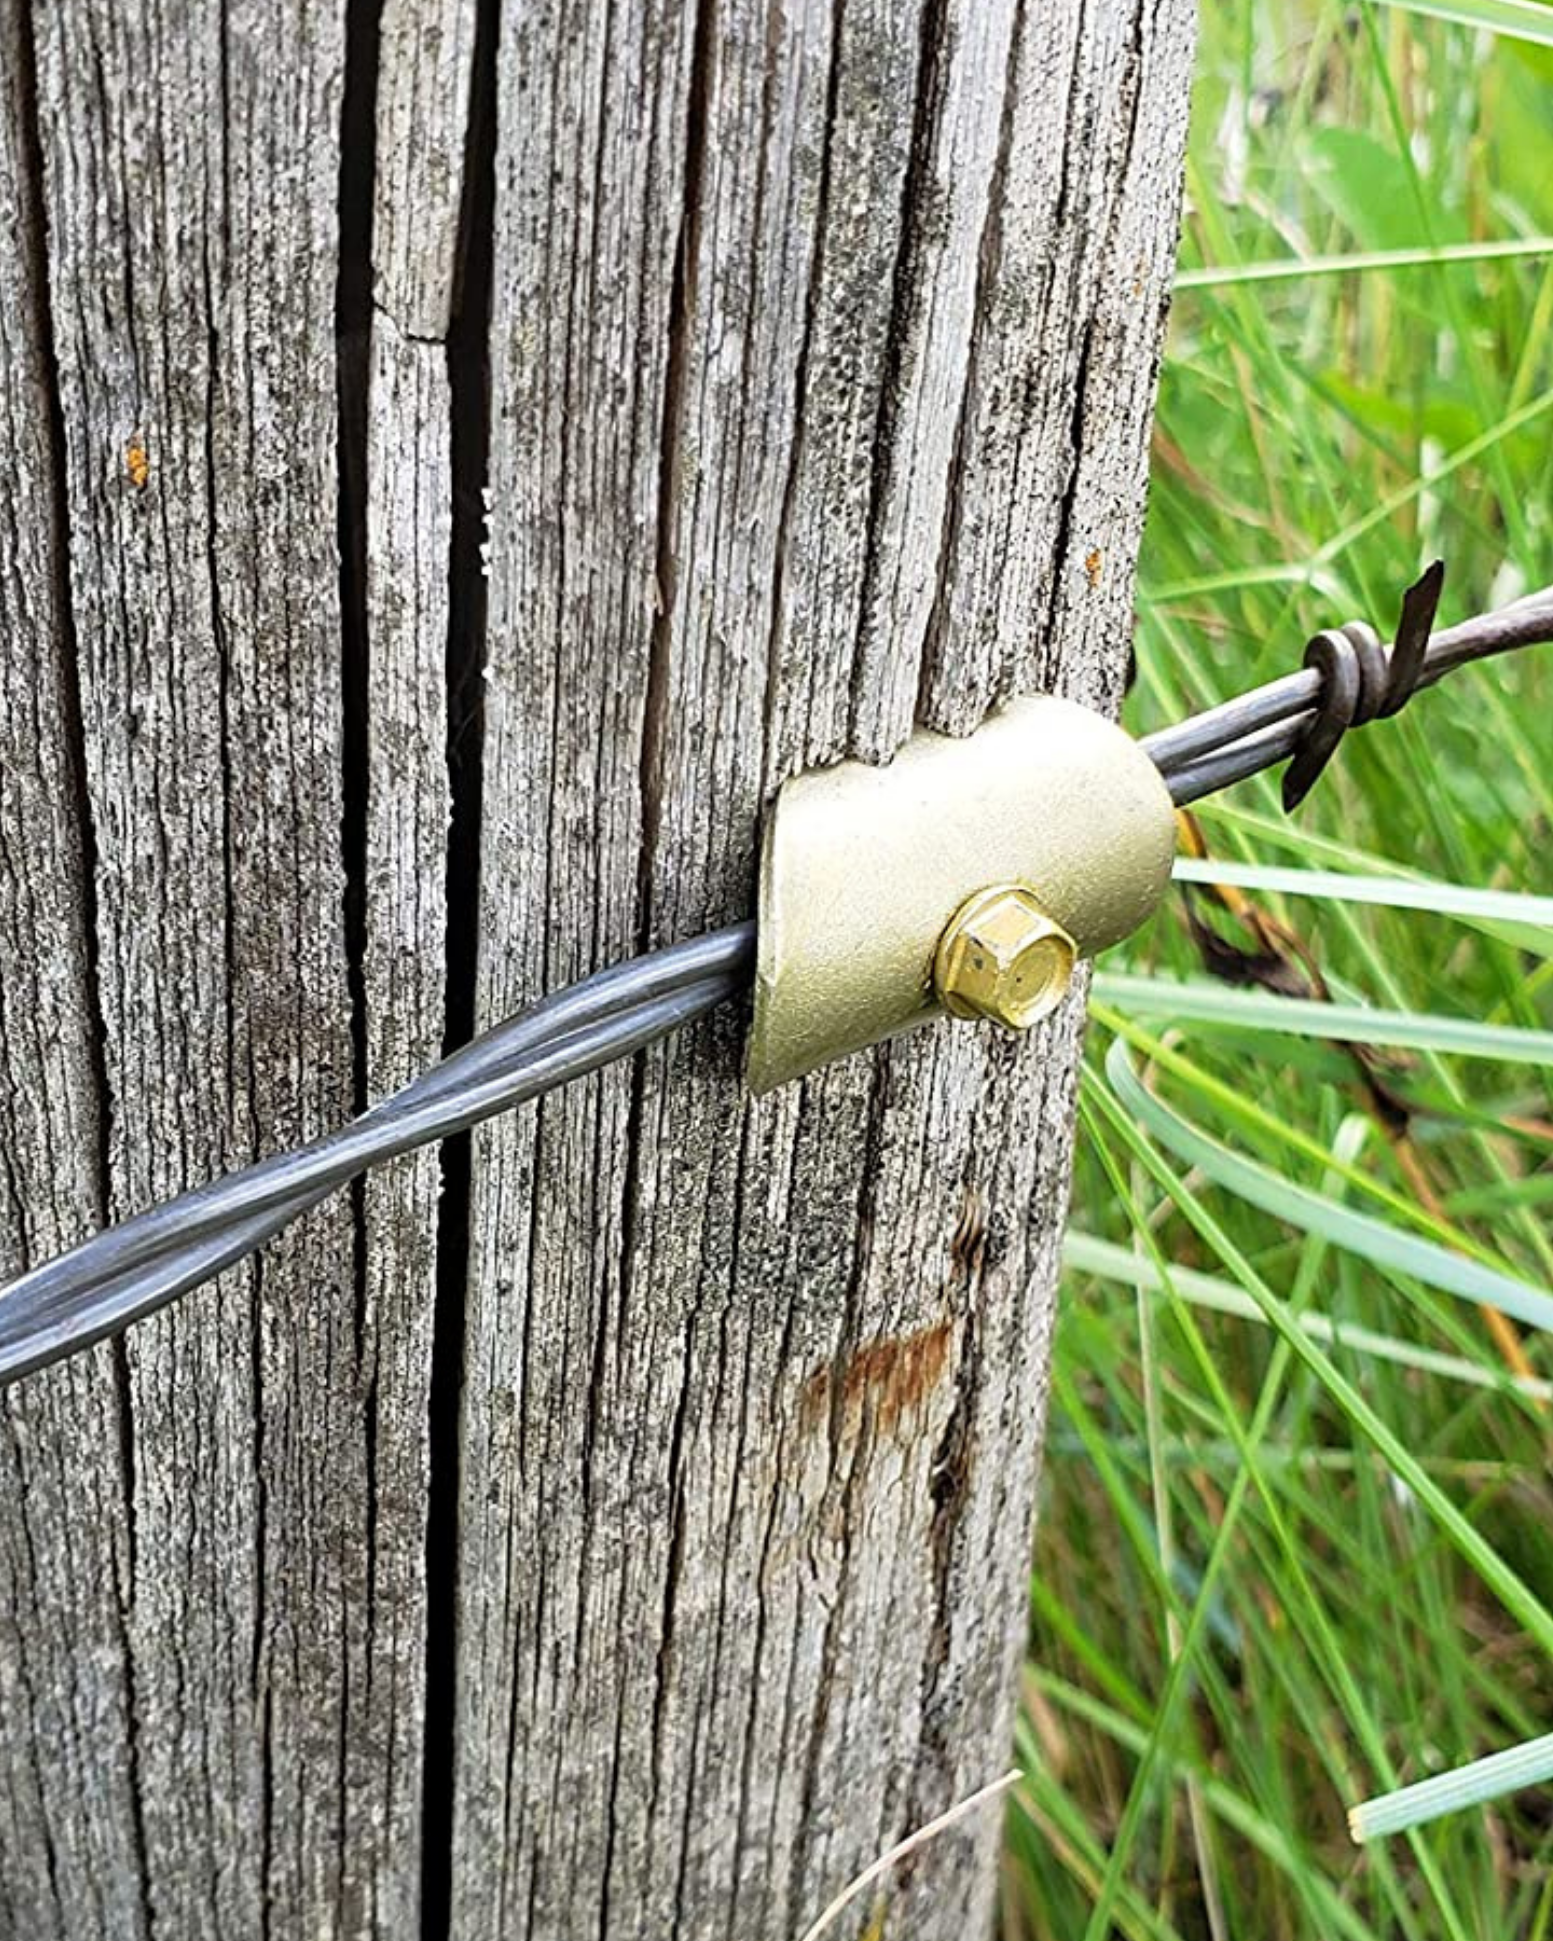 Cat's Claw fencing clip holding wire to fence post